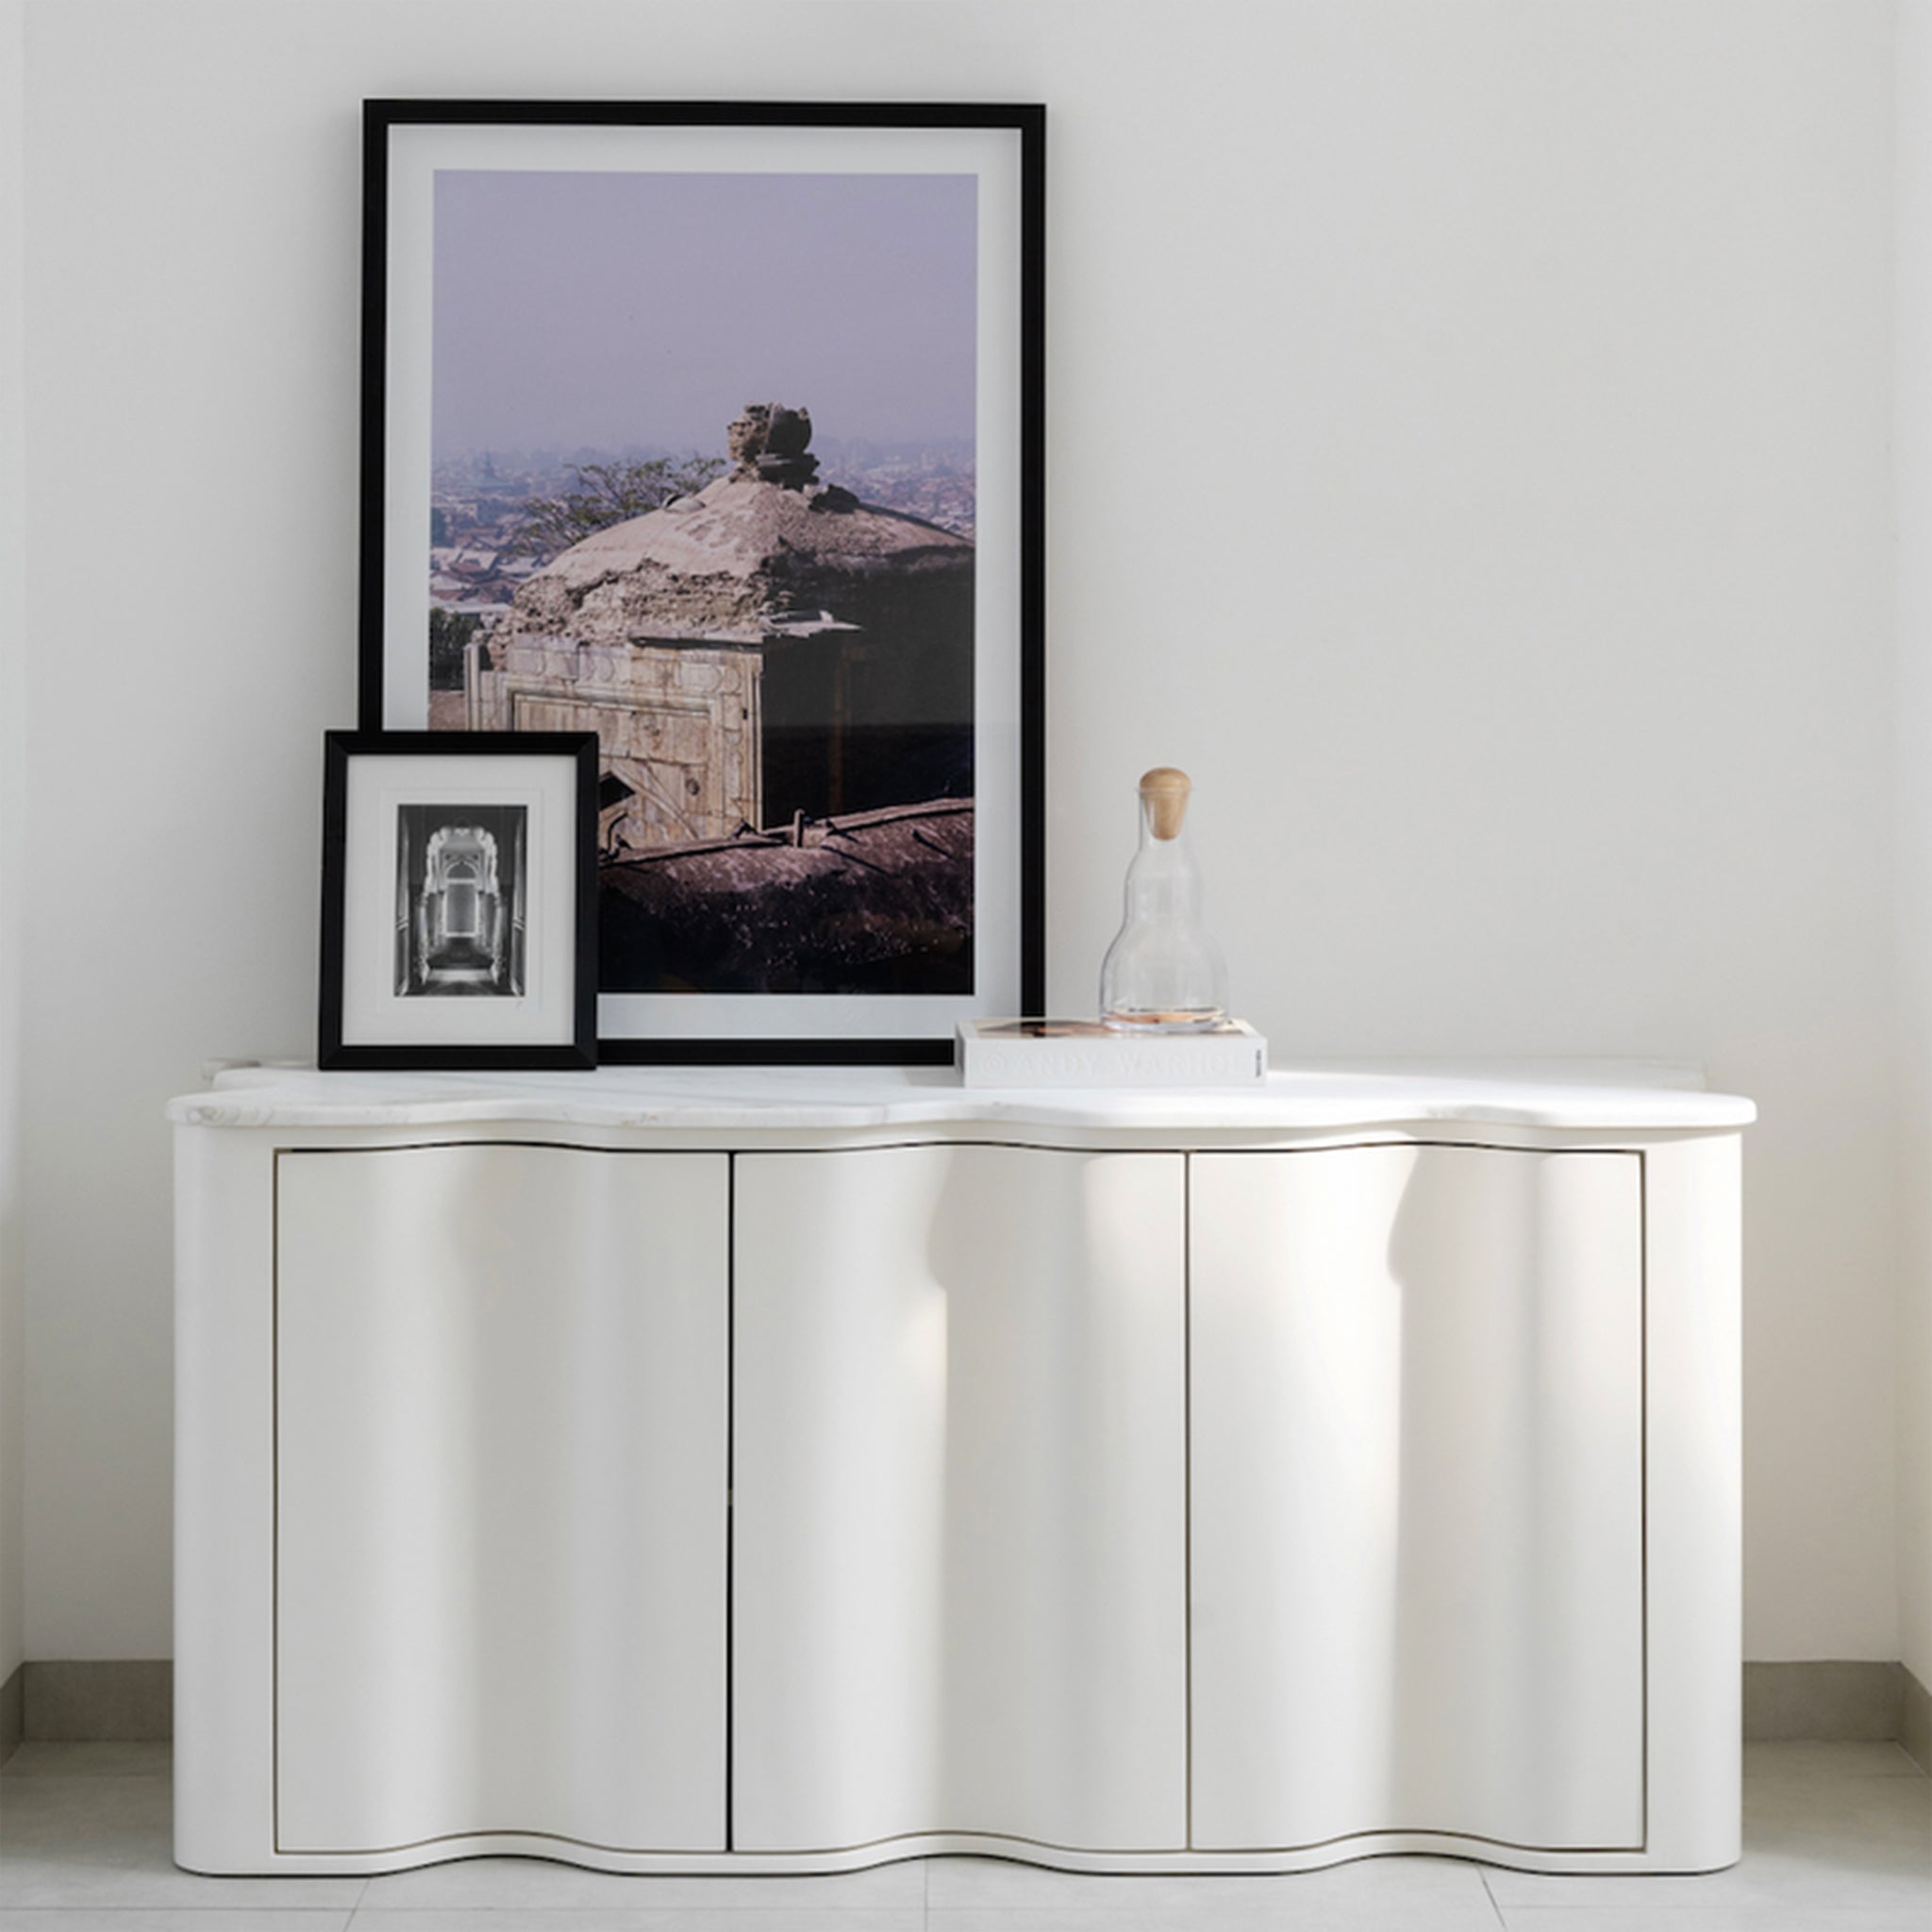 A chic sideboard with a wavy front design and a white marble top, adorned with framed photographs, a glass carafe, and a book. The sideboard is set against a light gray wall, creating a minimalist and elegant look in the living space.